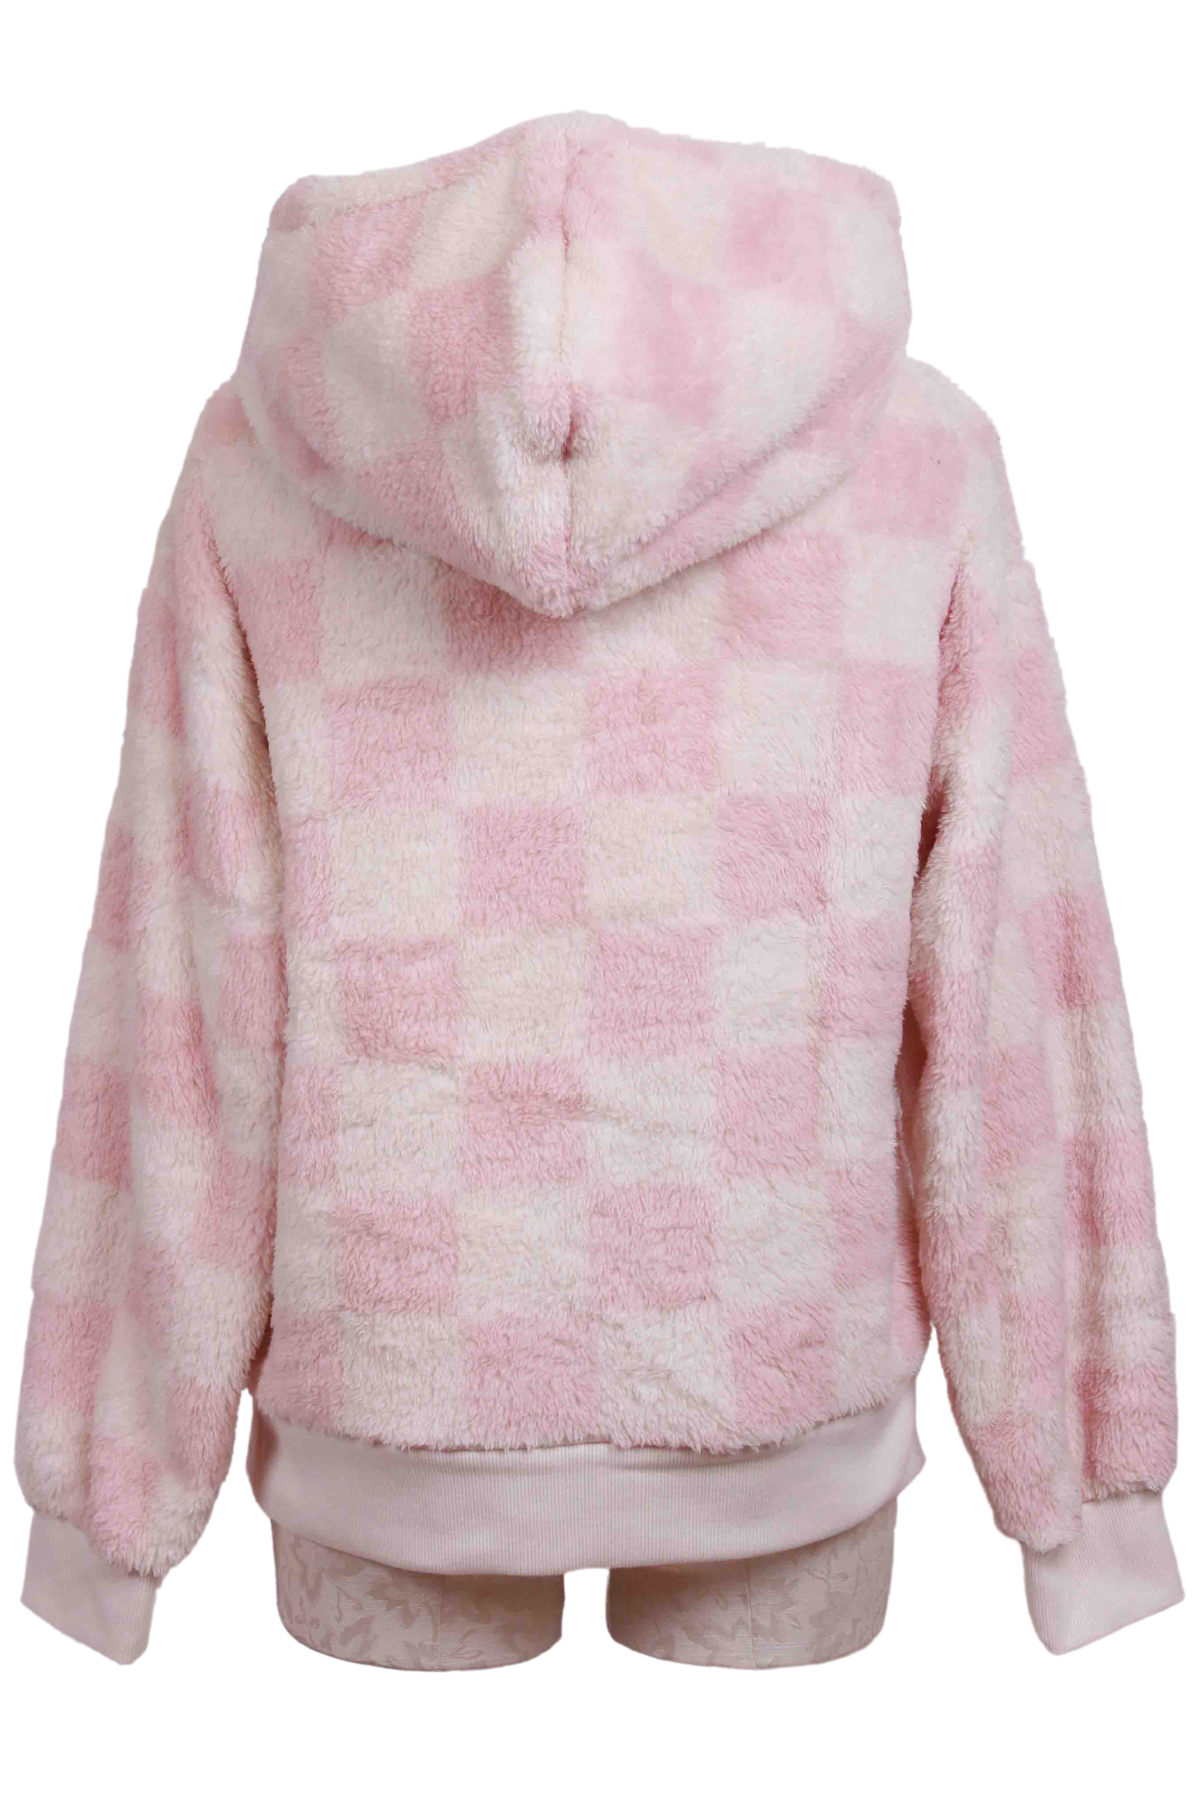 back view of Pink and Clay Checked Lets Cozy Fuzzy Hoodie by PJ Salvage